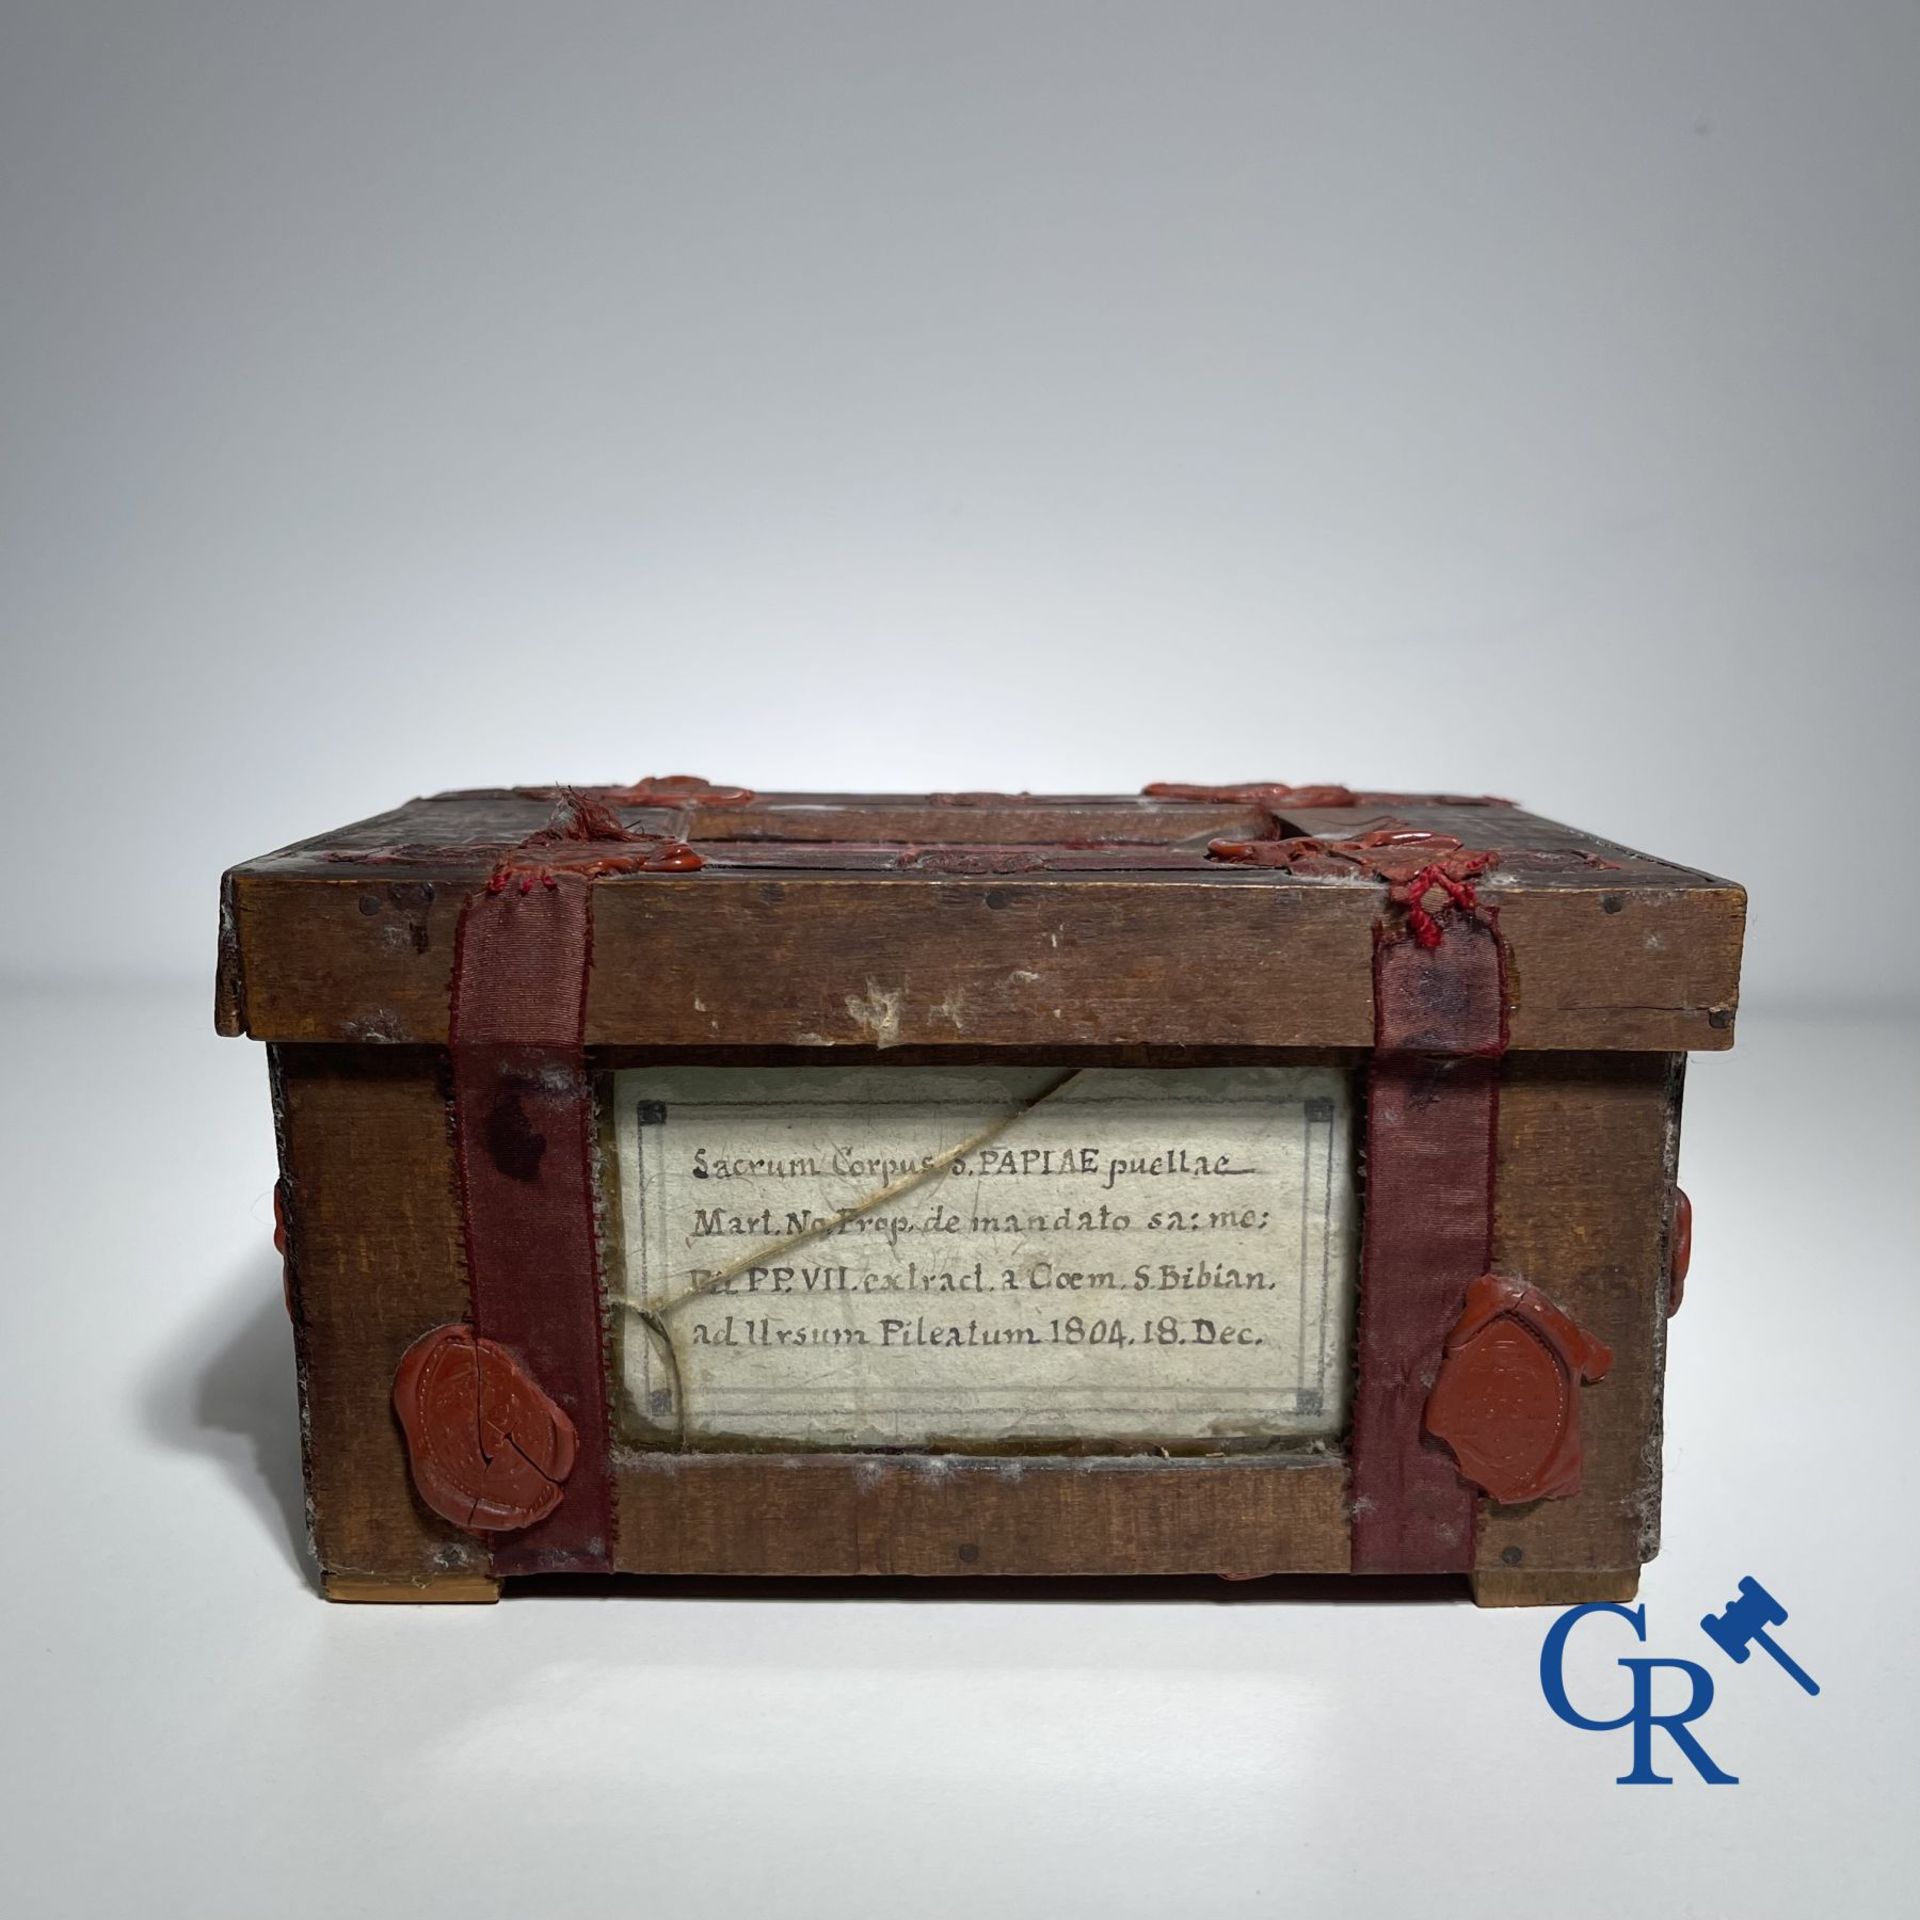 An antique wooden reliquary sealed with wax seals. Early 19th century.